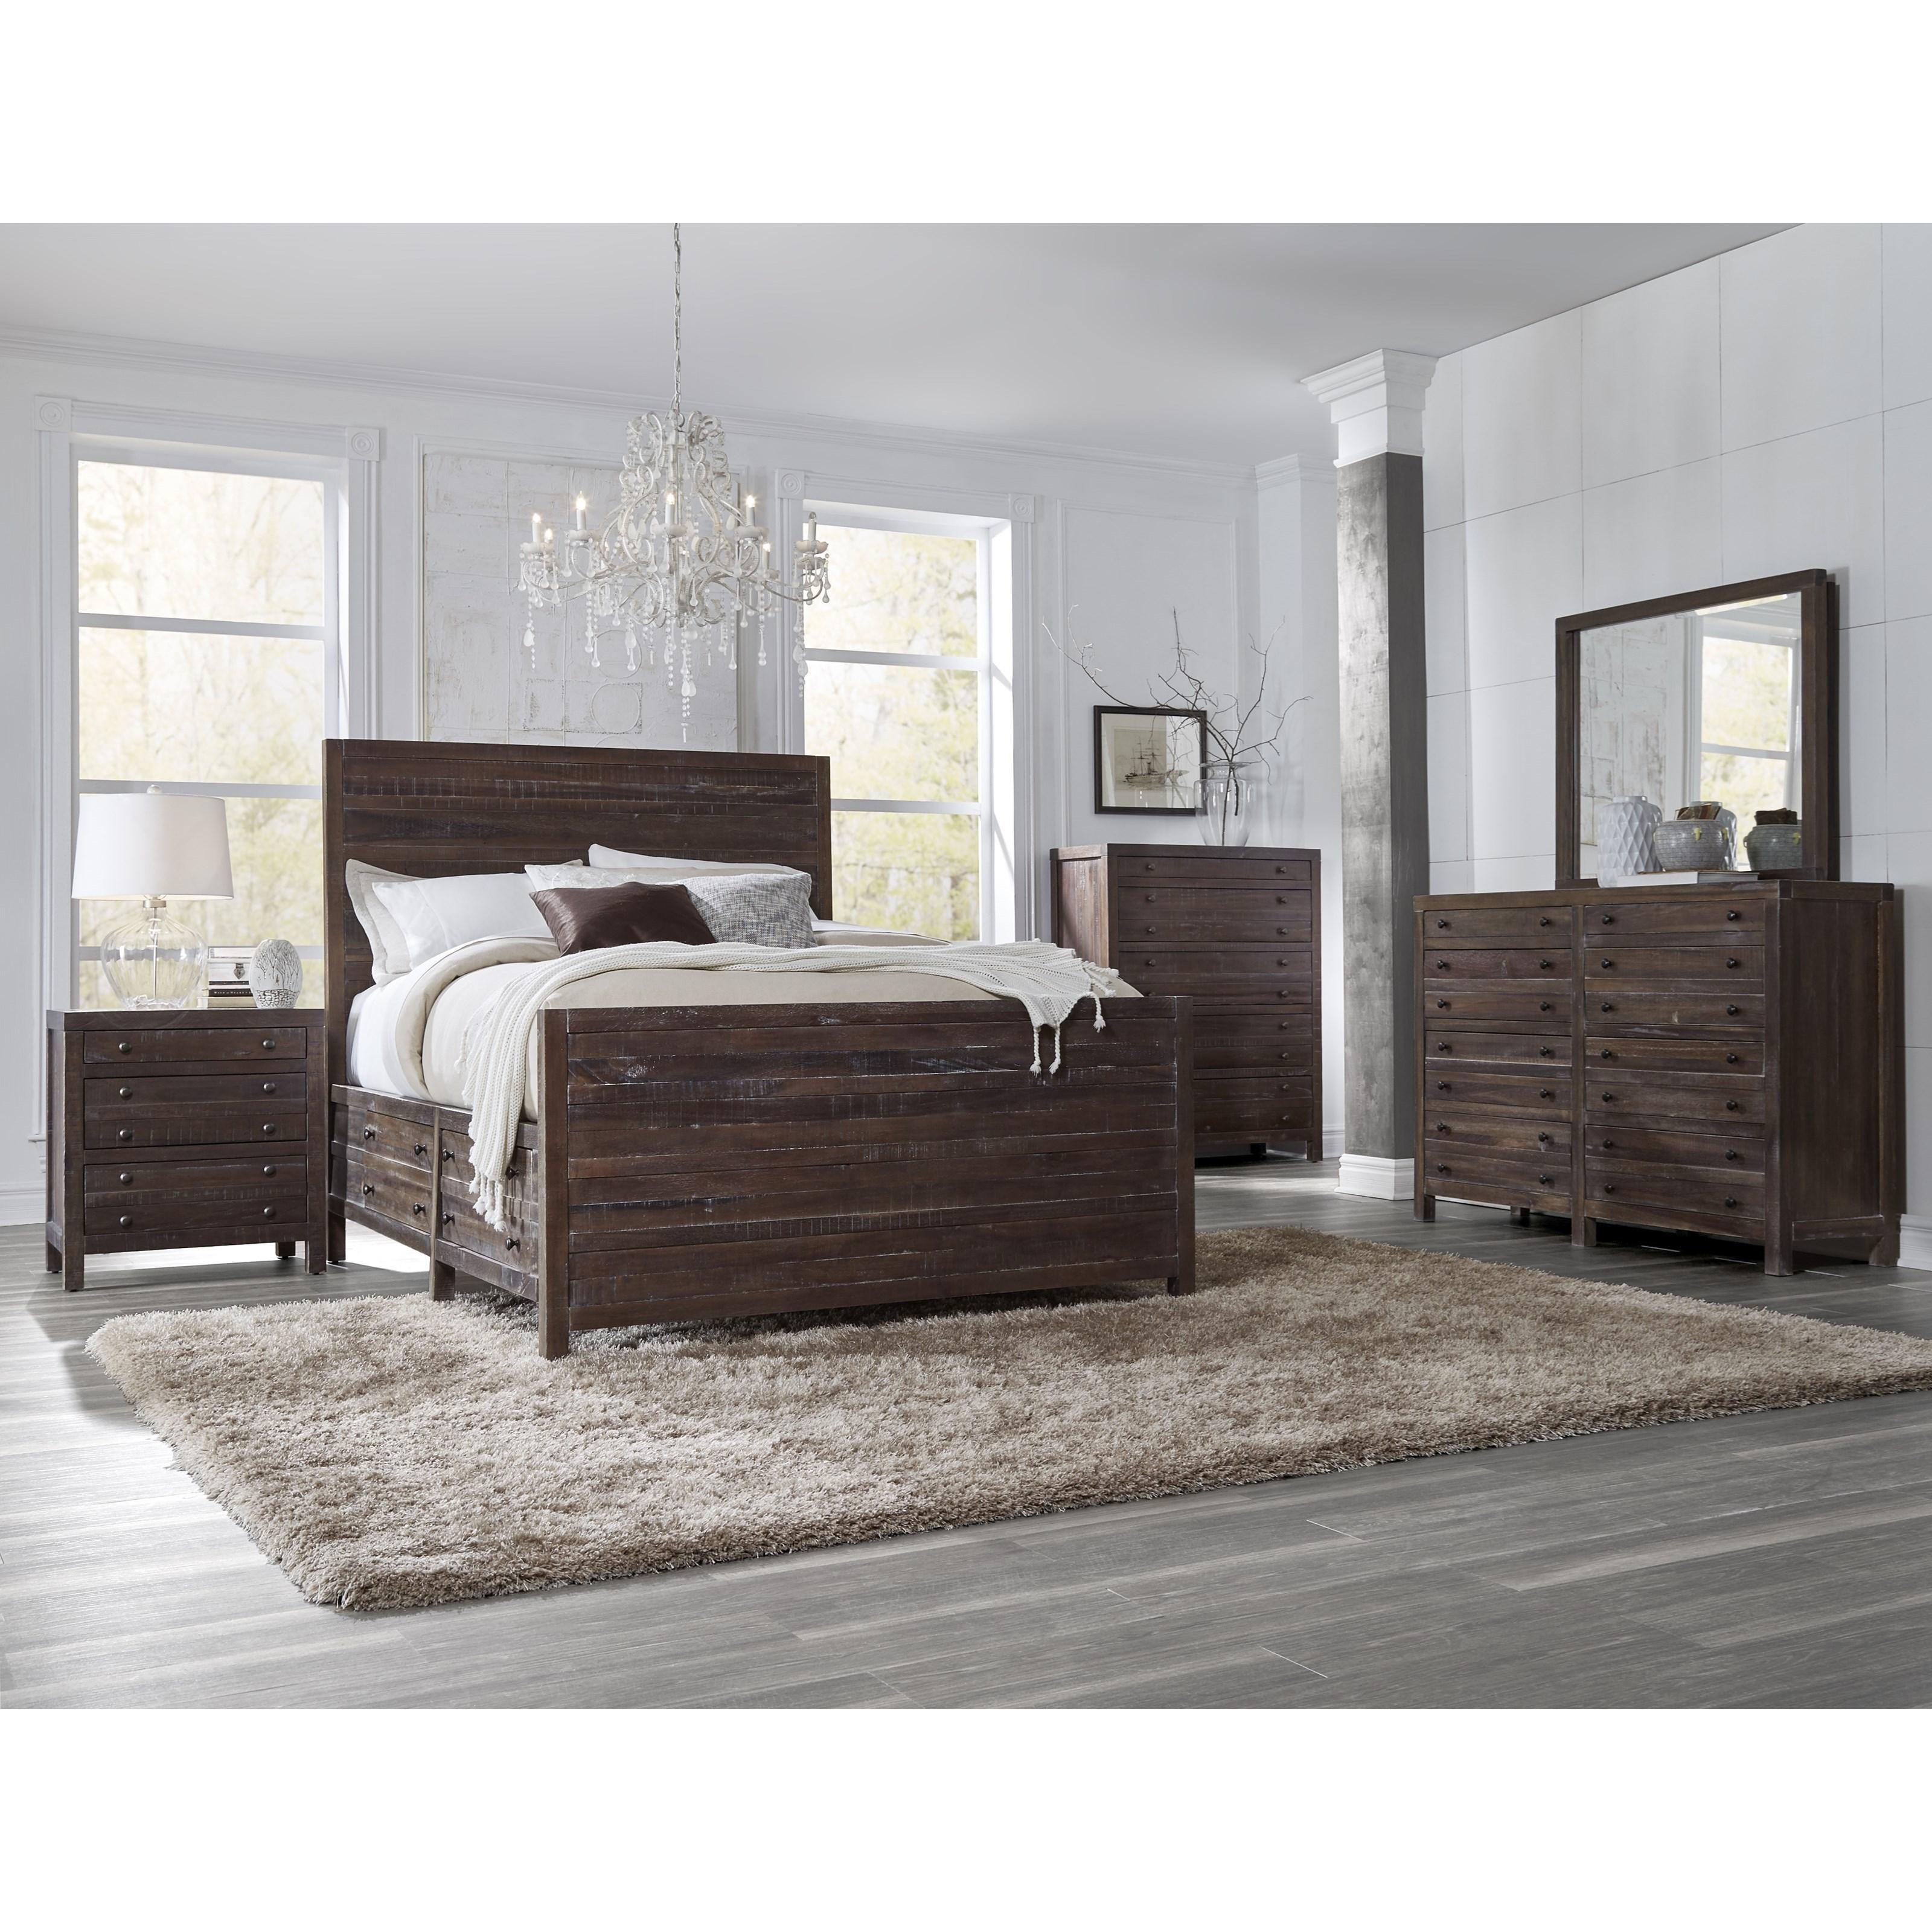 Contemporary, Rustic Storage Bedroom Set TOWNSEND 8T06D7-2NDM-5PC in Java 